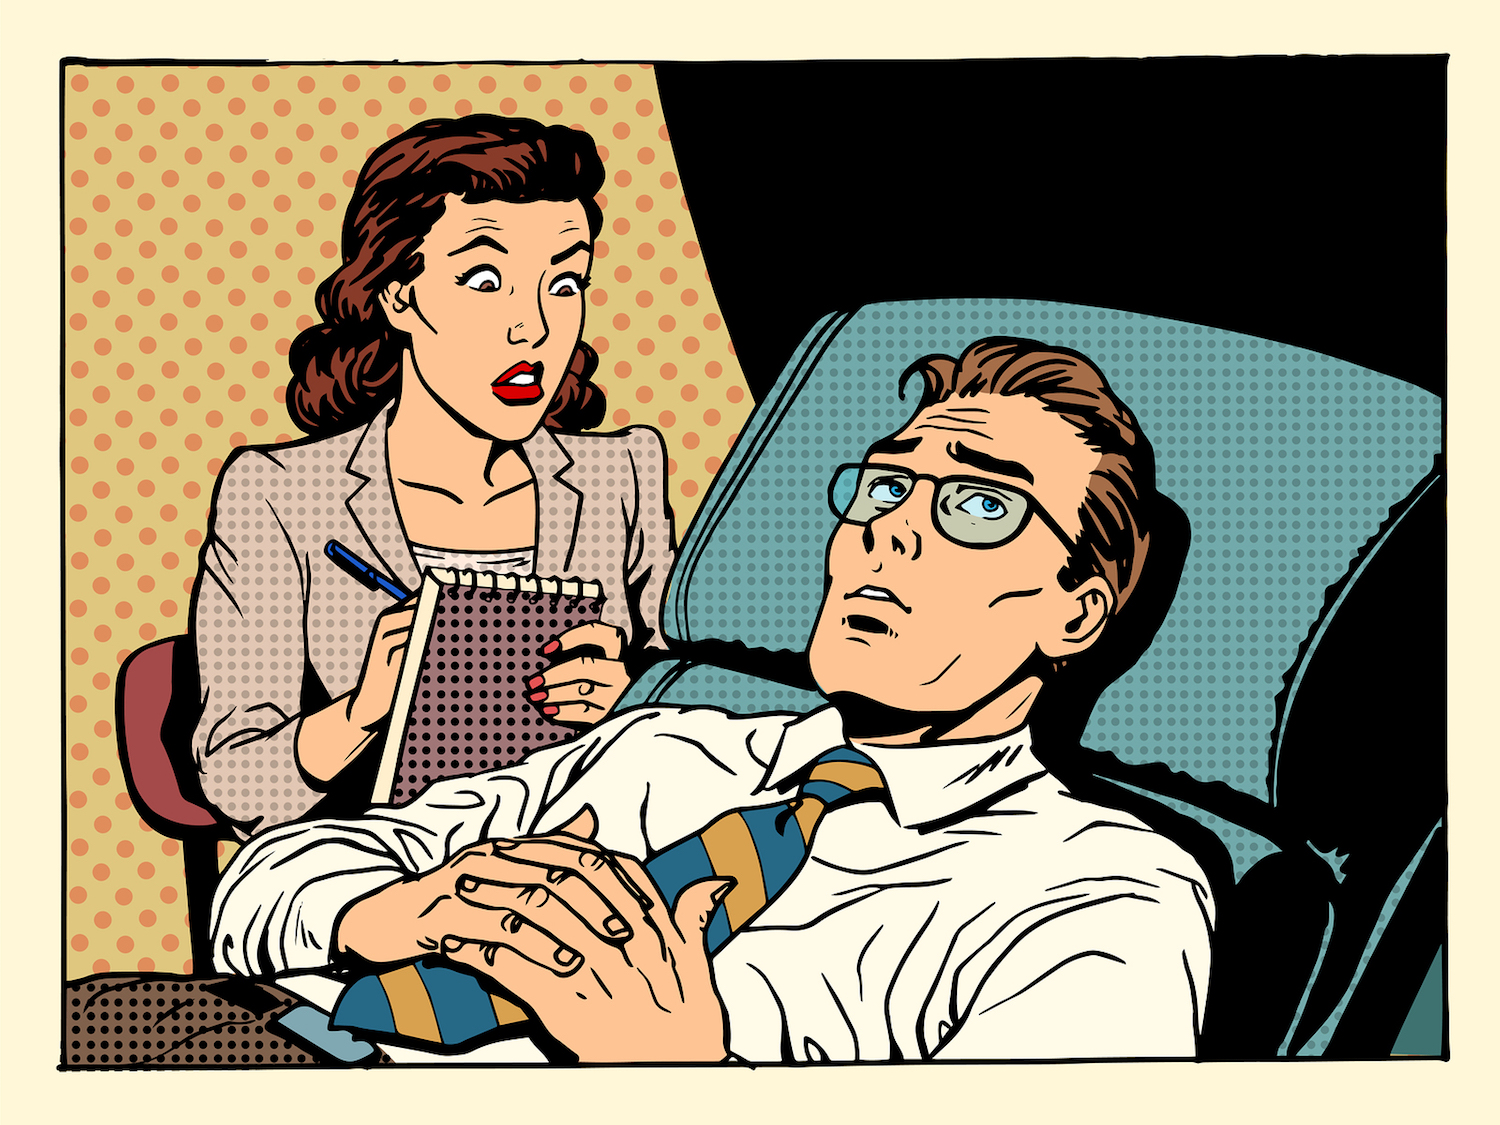 Cartoon displaying Conversational Therapist talking to a patient laying on a couch